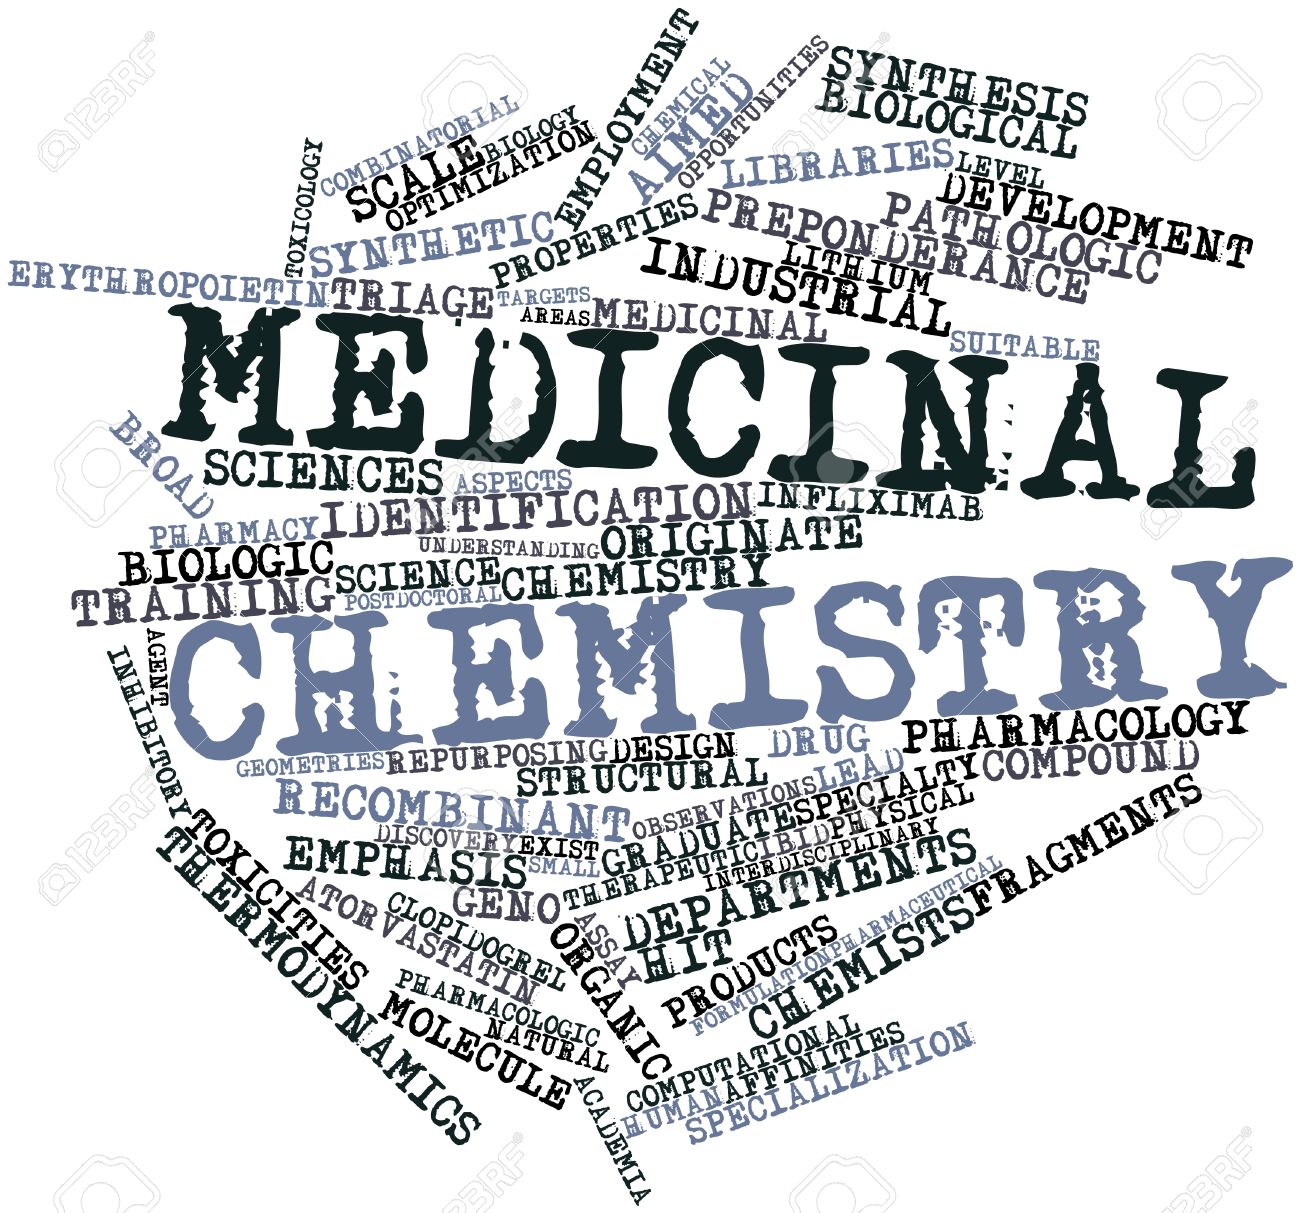 Selected topics in Medicinal Chemistry [PCH-4804]